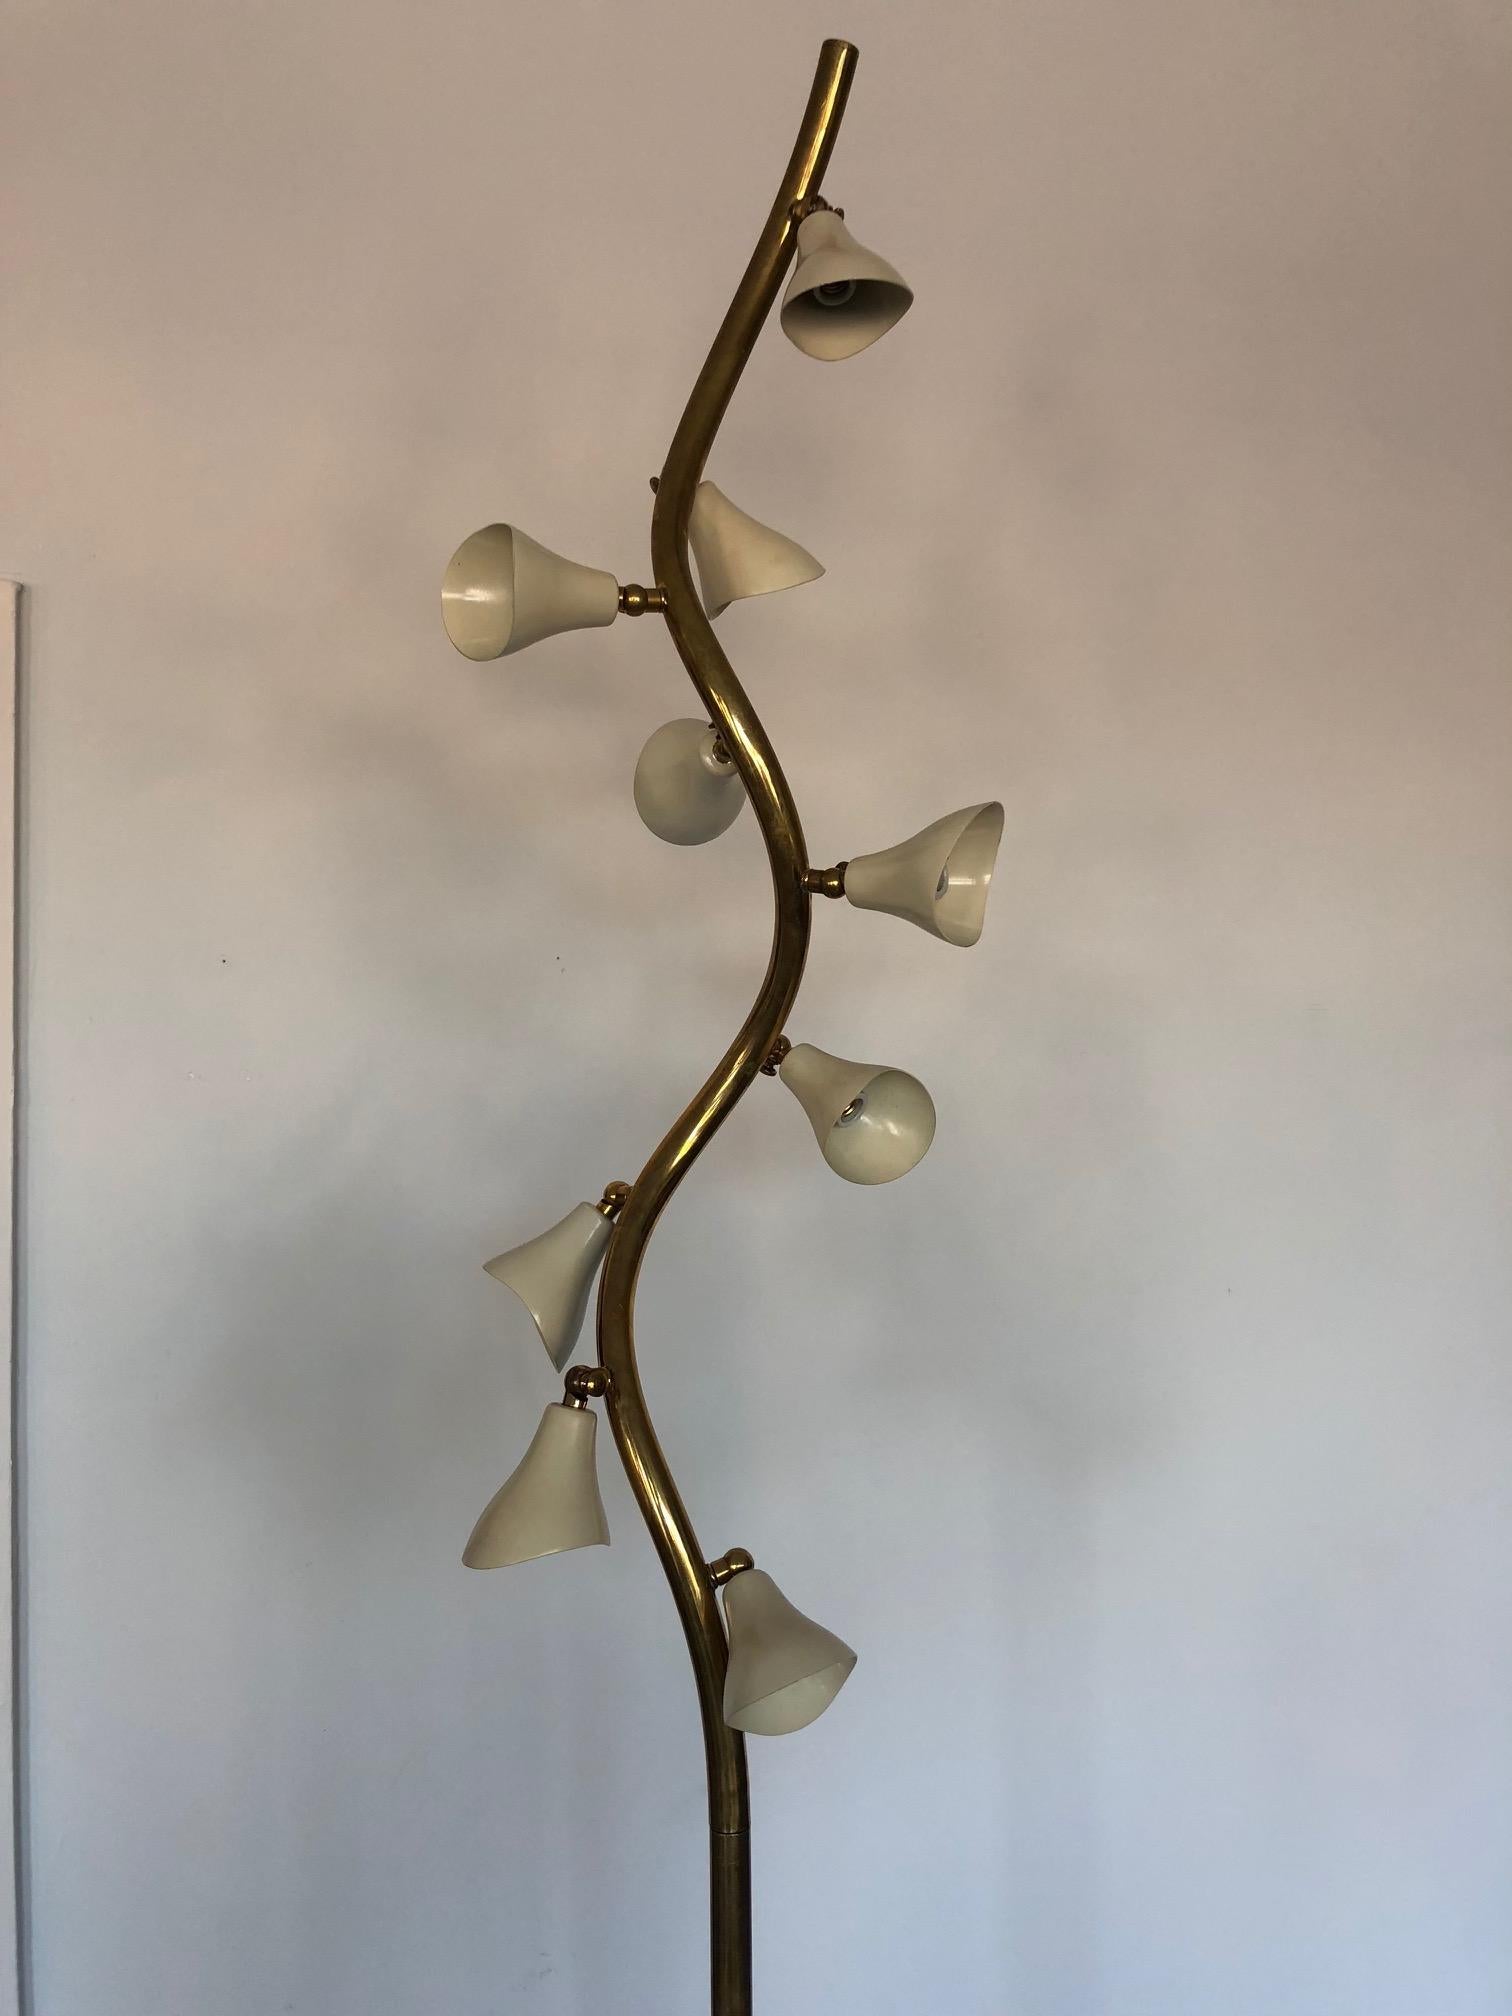 A rare and unusual floor lamp by Gino Sarfatti for Arteluce, model 1034. A tree form in polished brass, marble base, aluminum shades. Lamp is model 1034. 